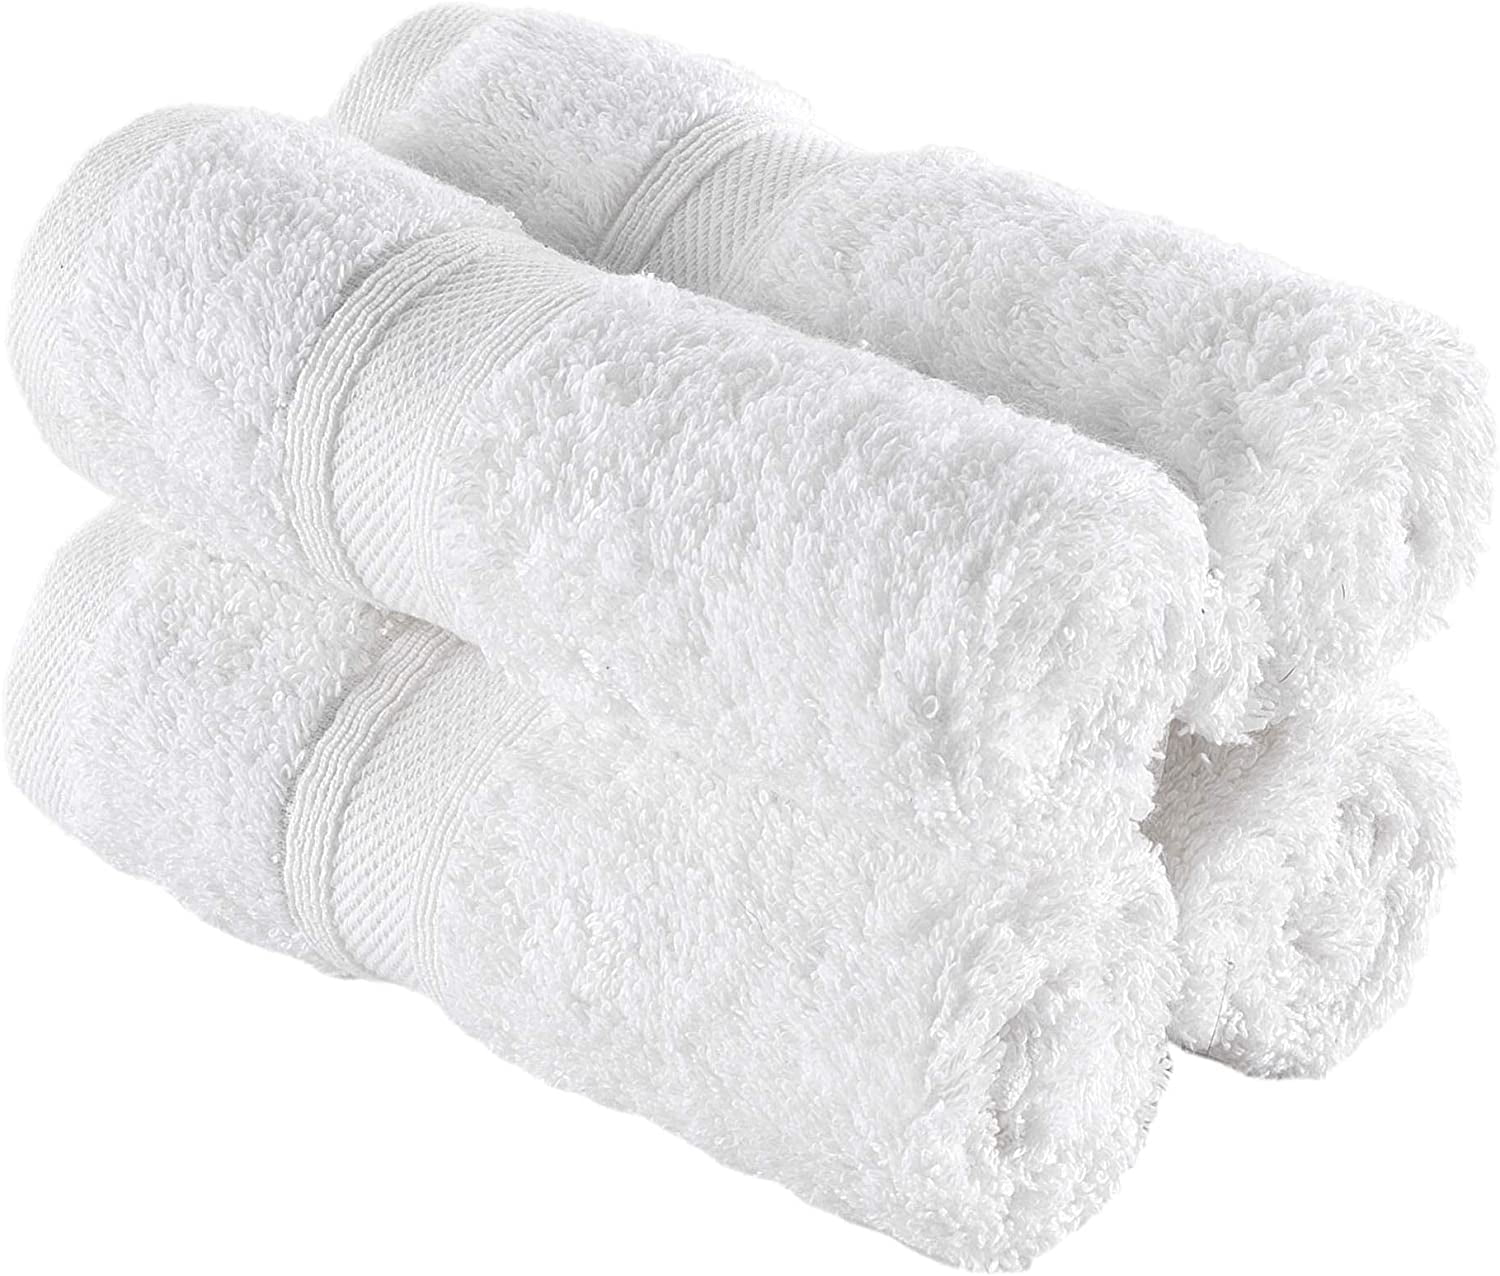 Hawmam Linen White Hand Towels 4-Pack -16 x 29 Turkish Cotton Premium  Quality Soft and Absorbent Small Towels for Bathroom